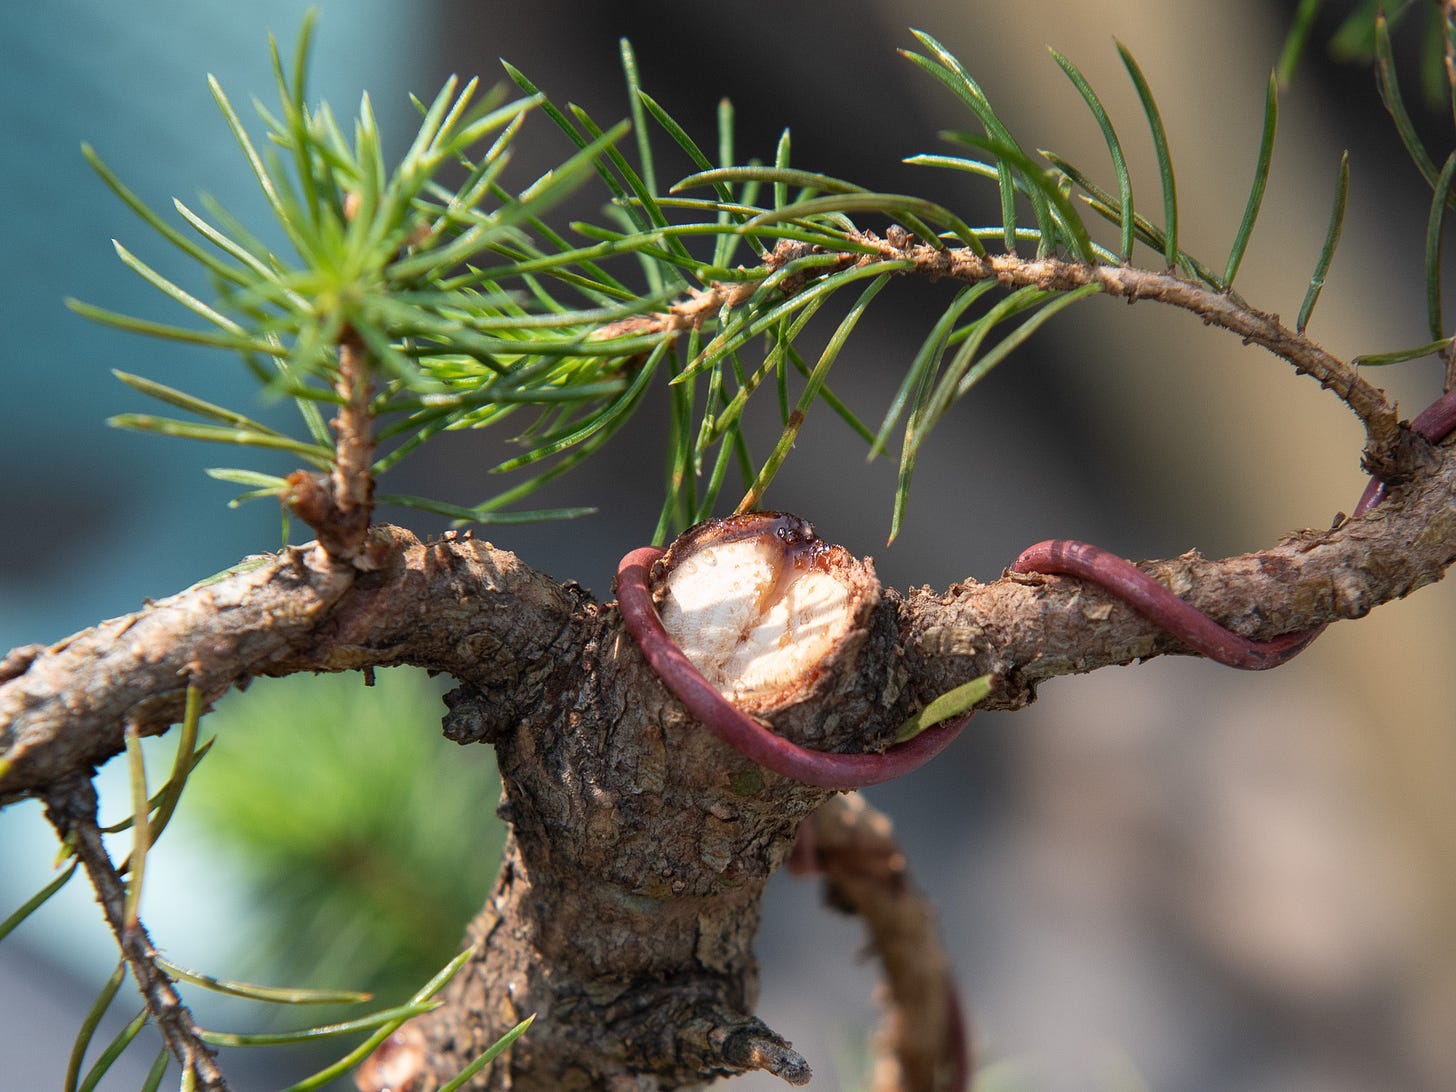 ID: Pruning scar on dwarf Alberta spruce bonsai, with sap flowing from the wound